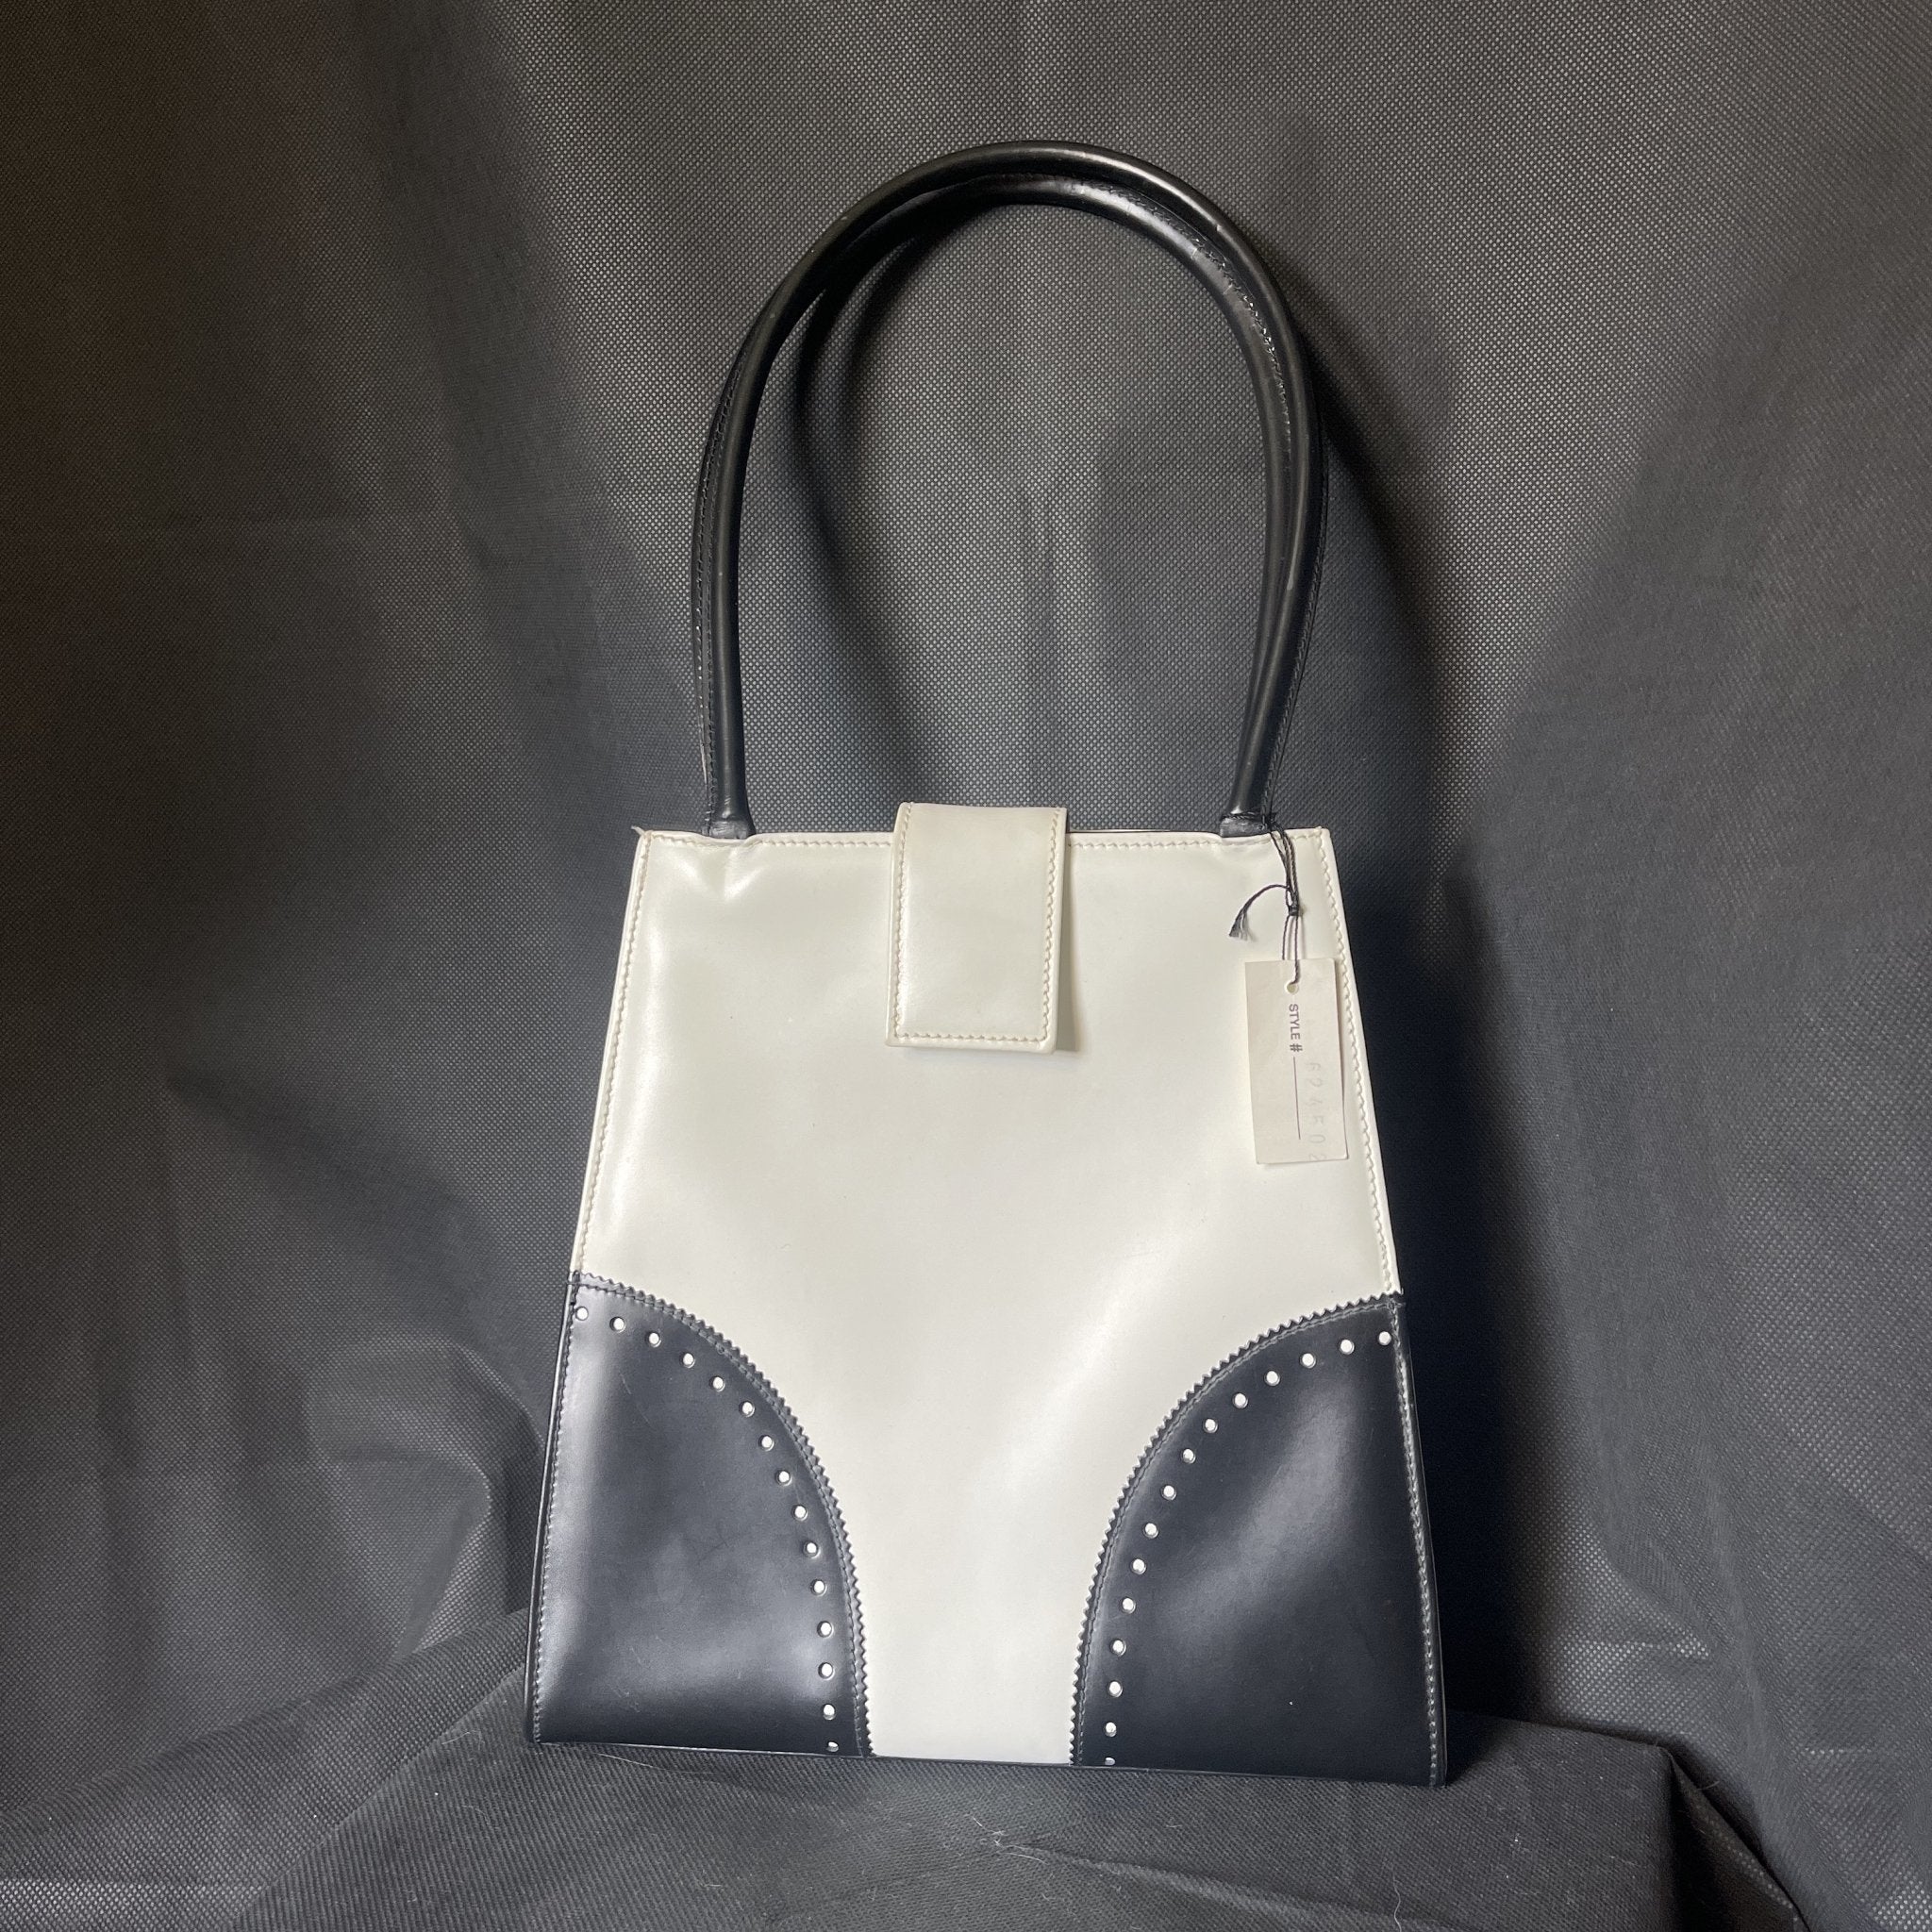 Saks Fifth Avenue Ebony Leather Handbag Made in Italy For Sale at